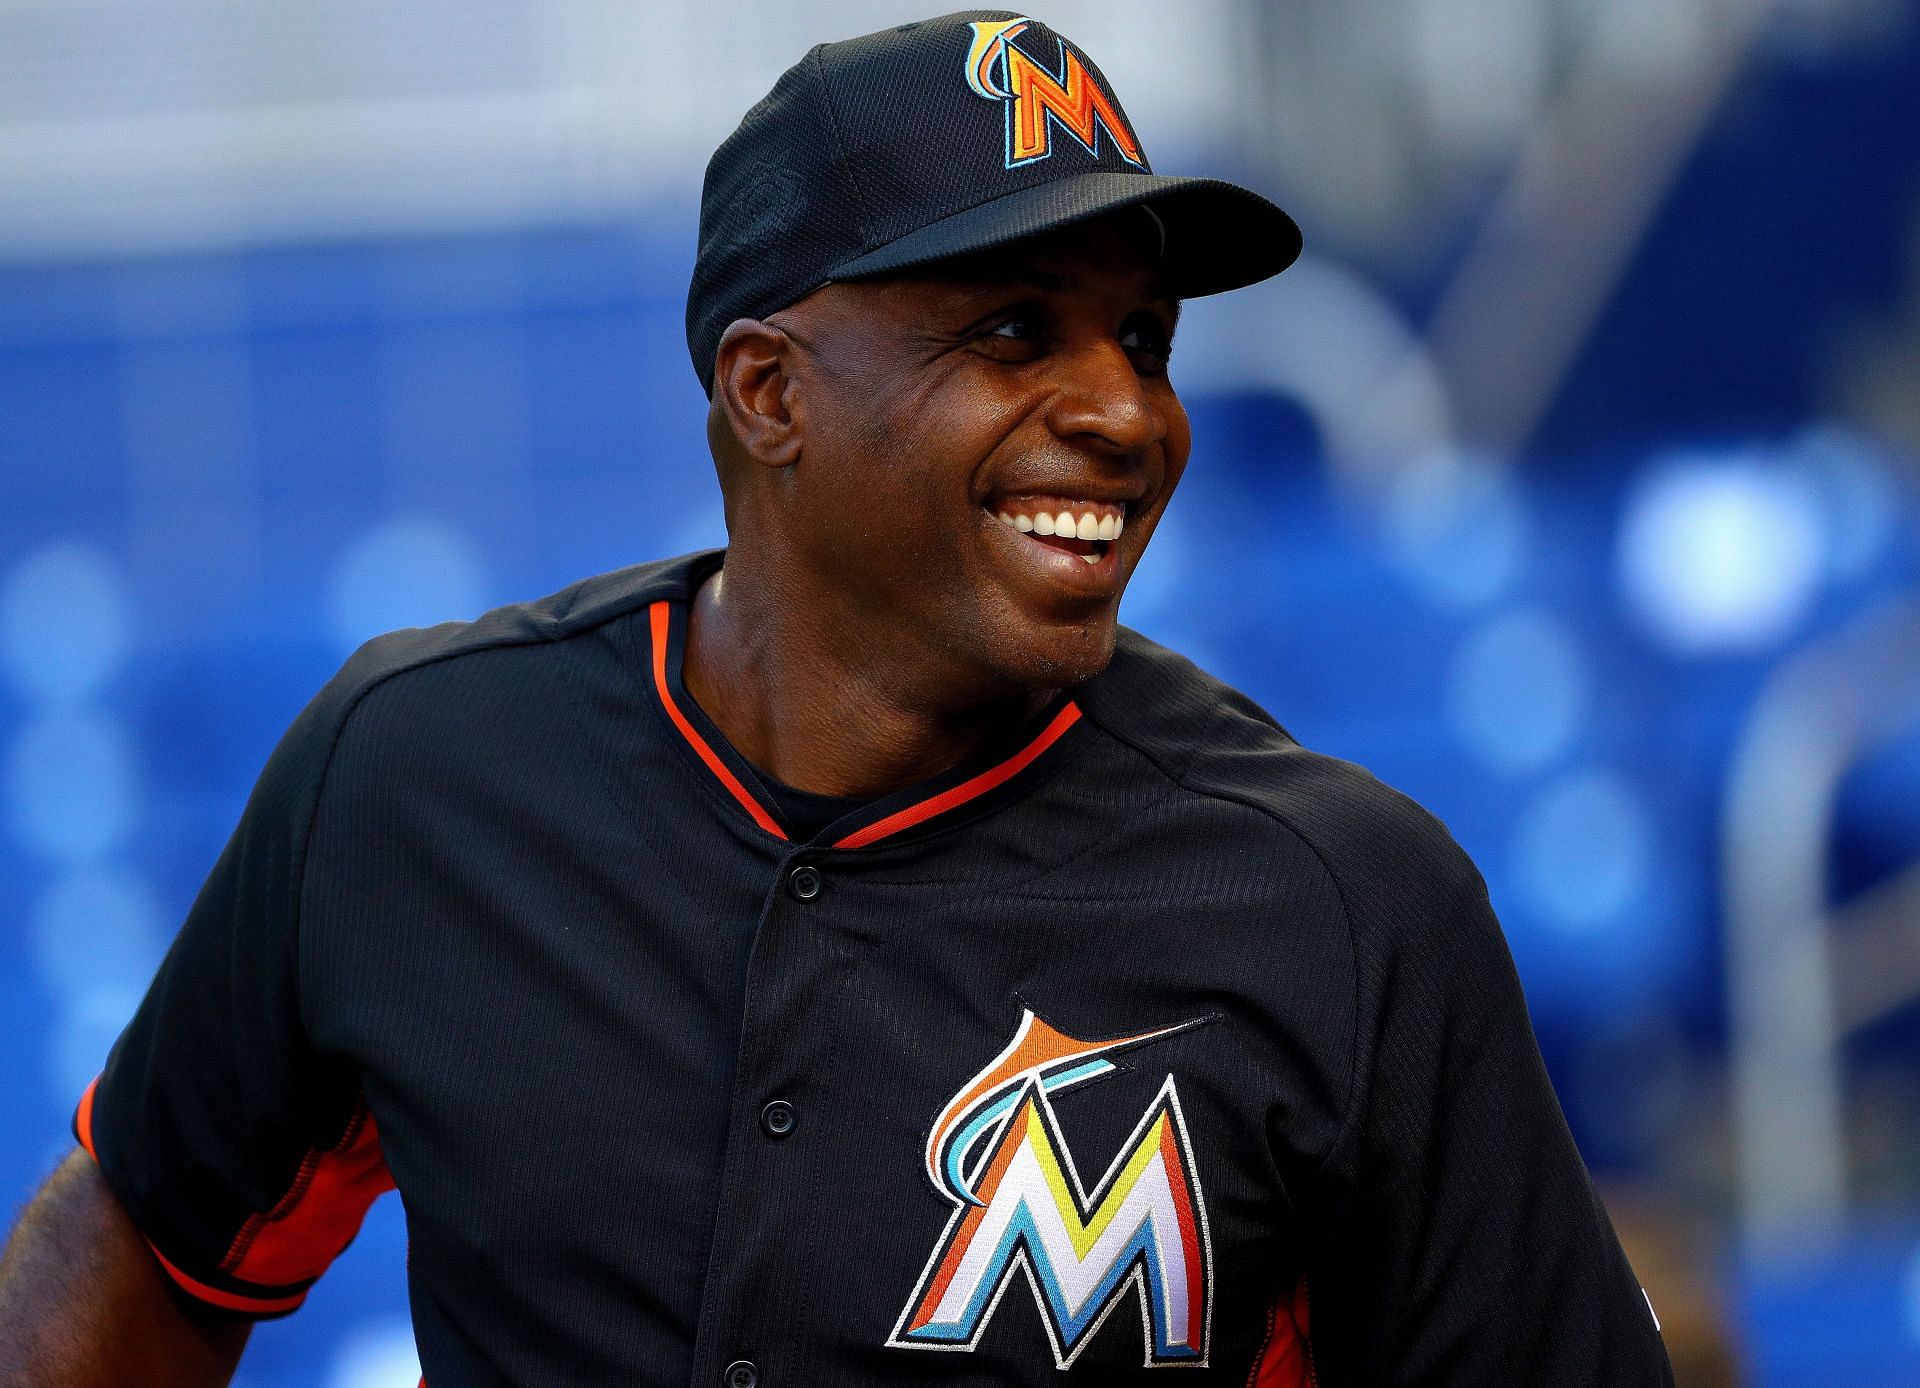 Detroit Tigers v Miami Marlins MIAMI, FLORIDA - APRIL 05: Hitting coach Barry Bonds #25 of the Miami Marlins looks on during 2016 Opening Day against the Detroit Tigers at Marlins Park on April 5, 2016 in Miami, Florida. (Photo by Mike Ehrmann/Getty Images)